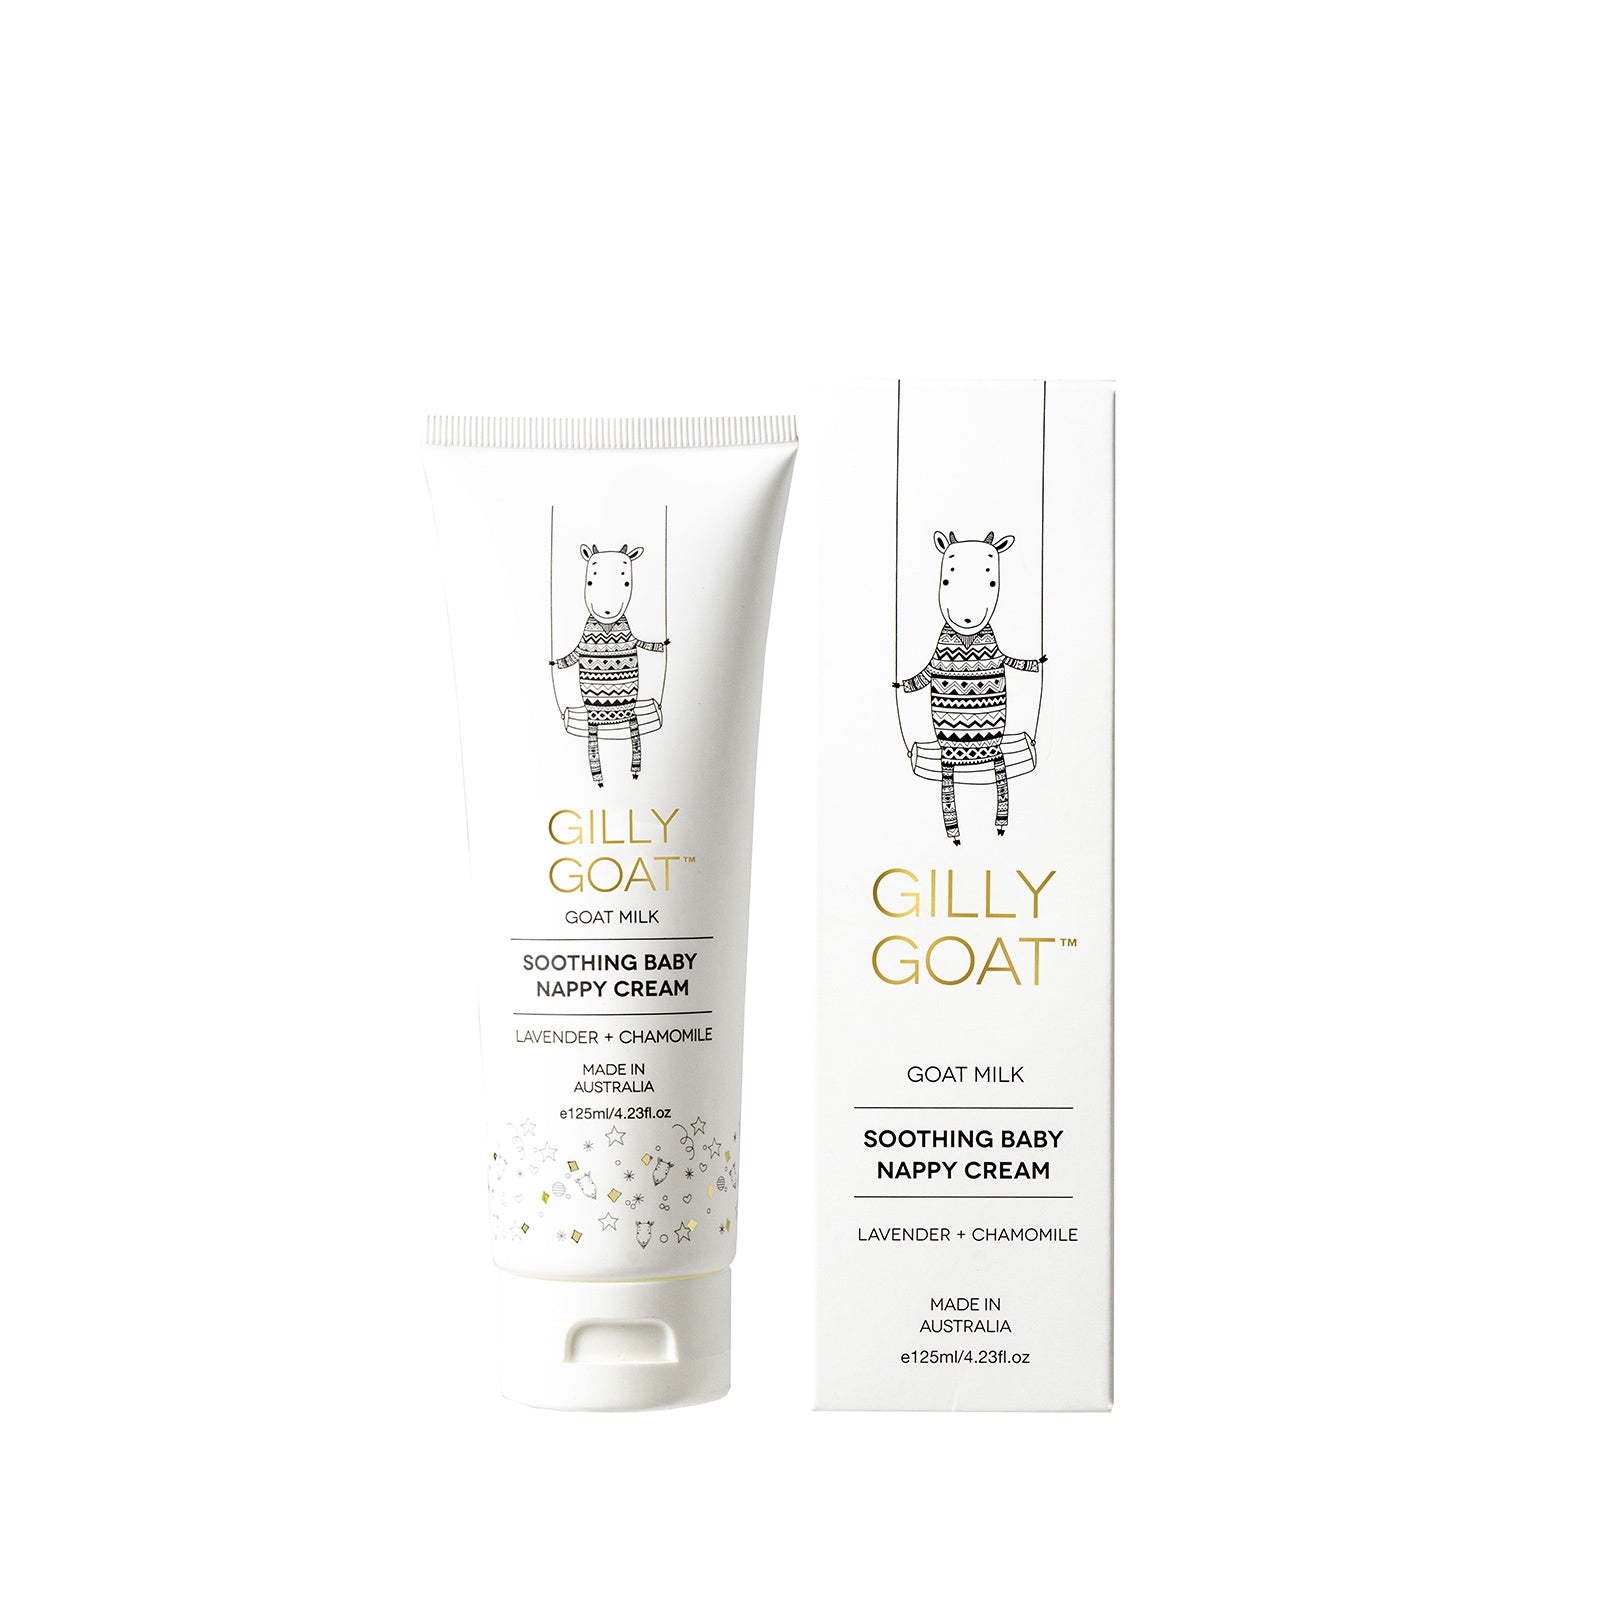 Gilly Goat Soothing Baby Nappy Cream